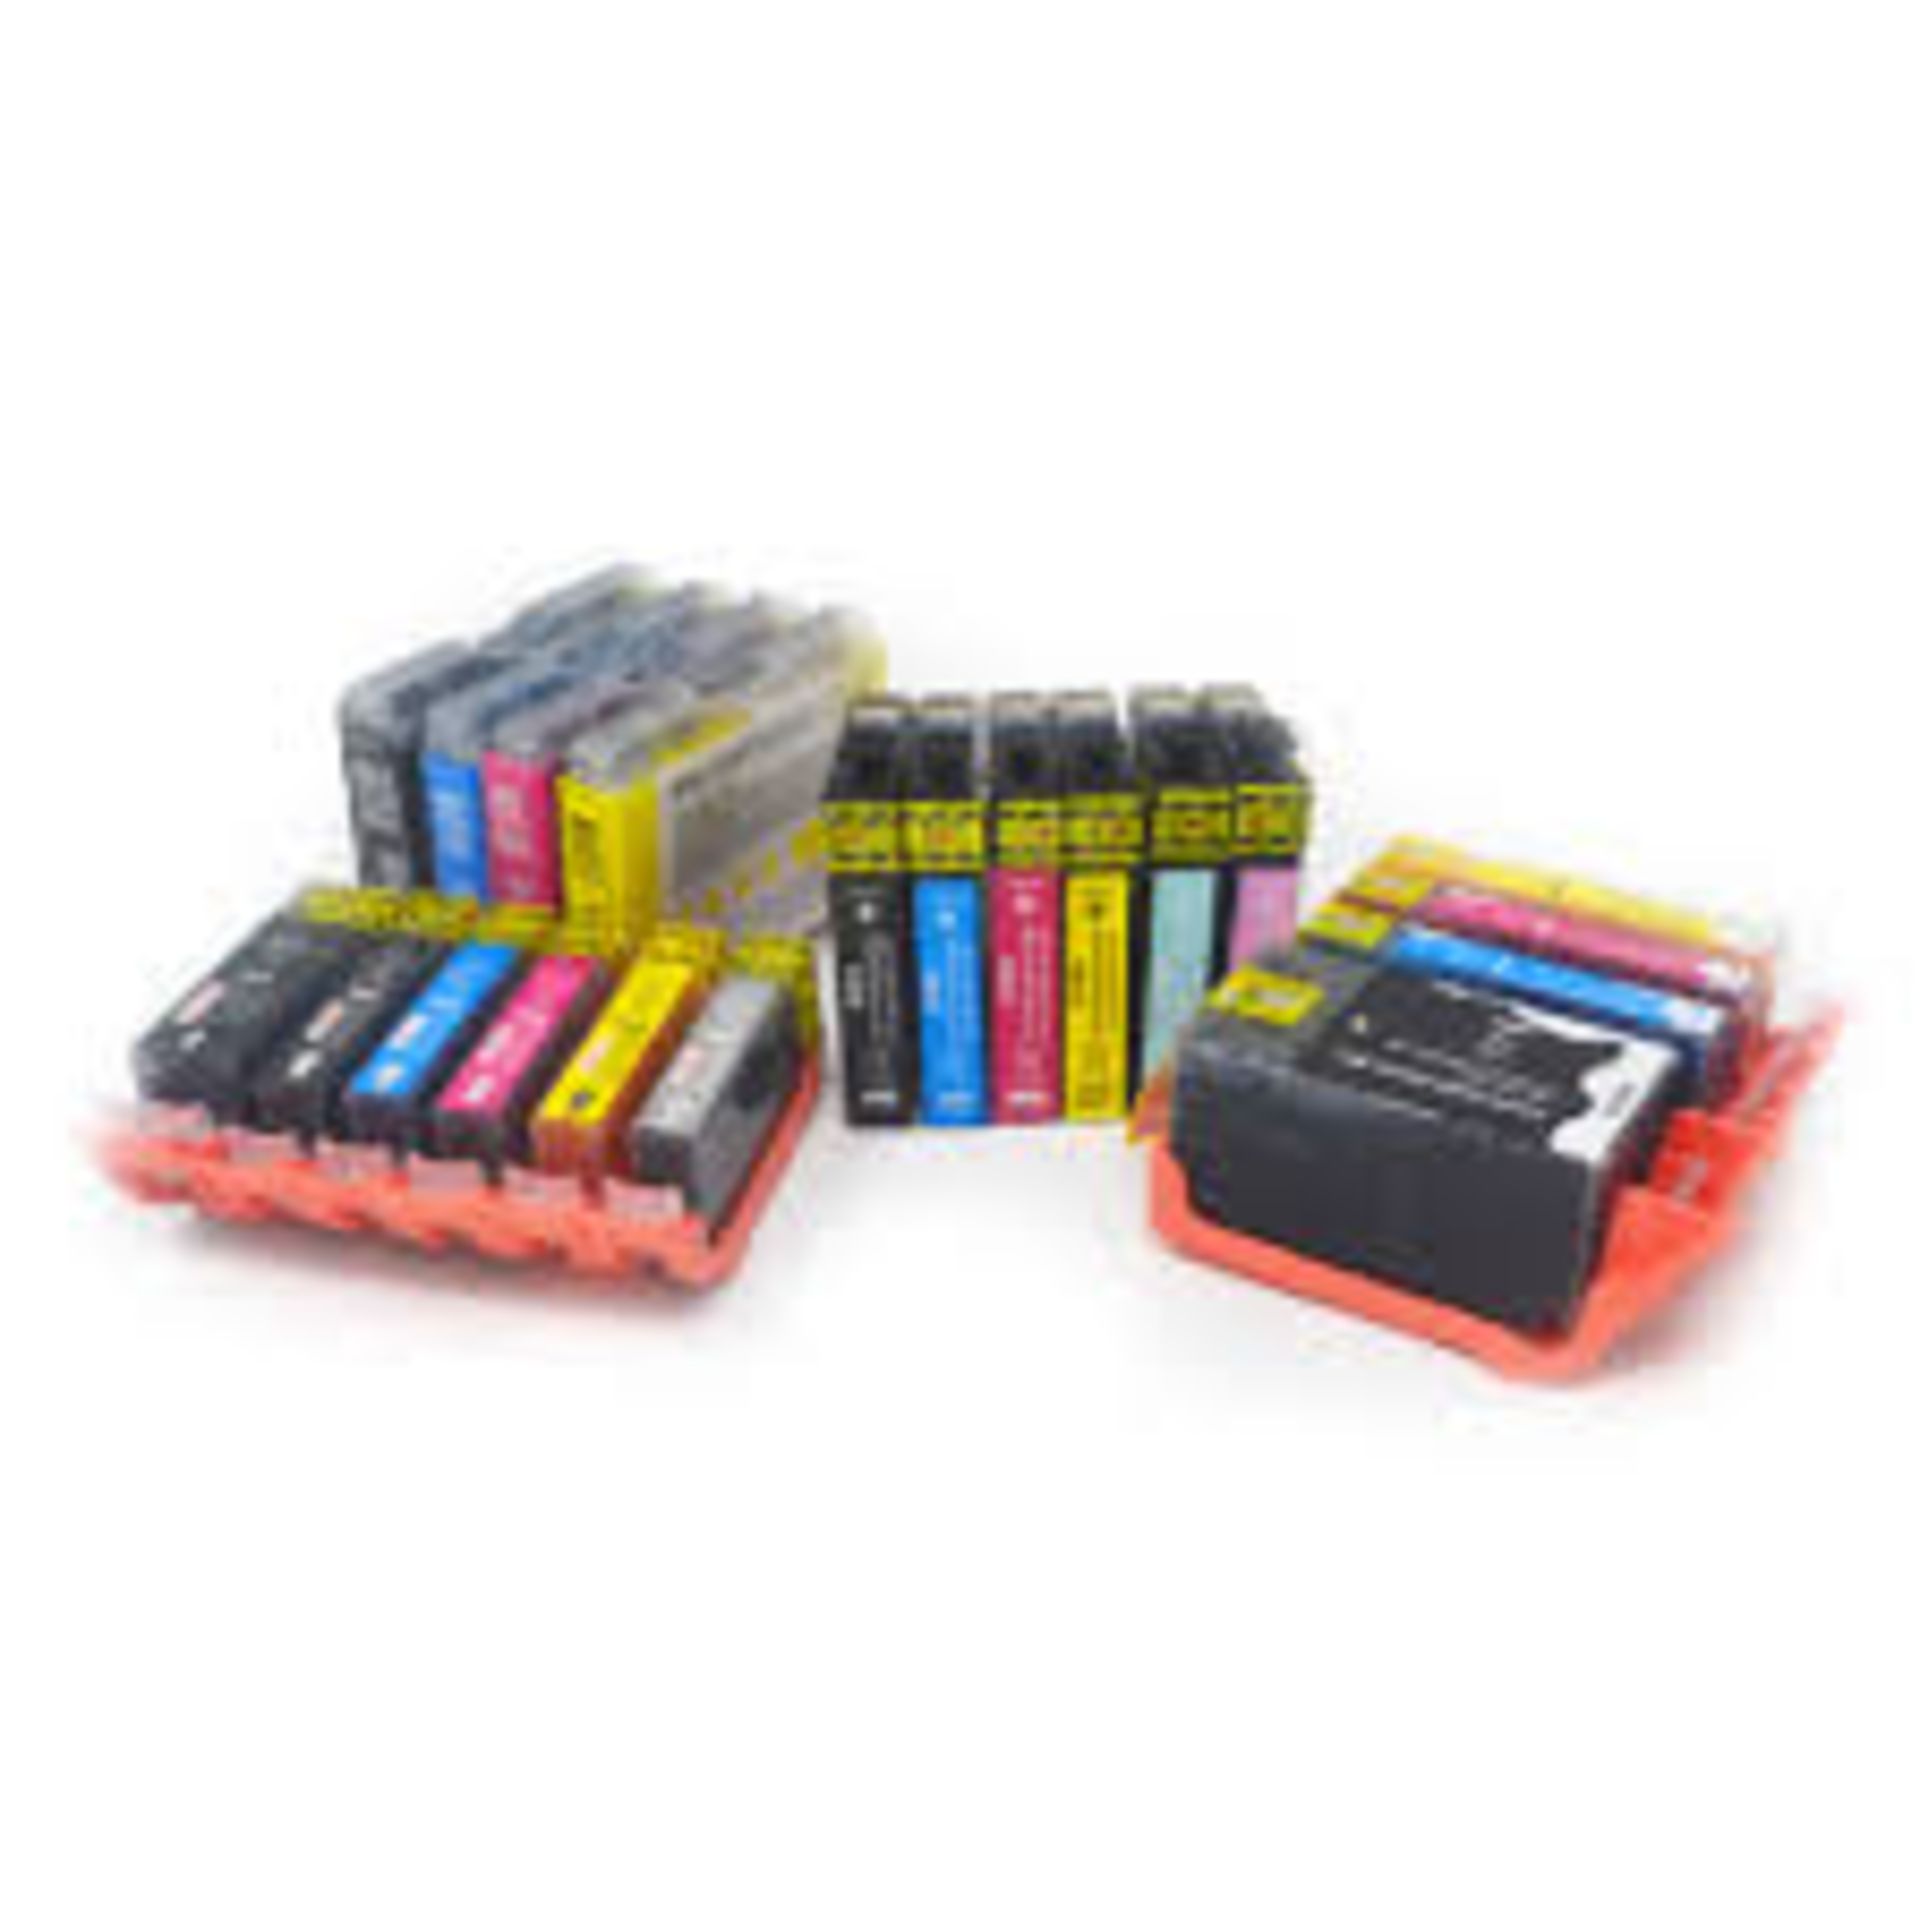 MAJOR LIQUIDATION OF CIRCA 15000 PRINTER CARTRIDGES/TONERS COMPATIBLE WITH BROTHER, EPSON, HP, CANO